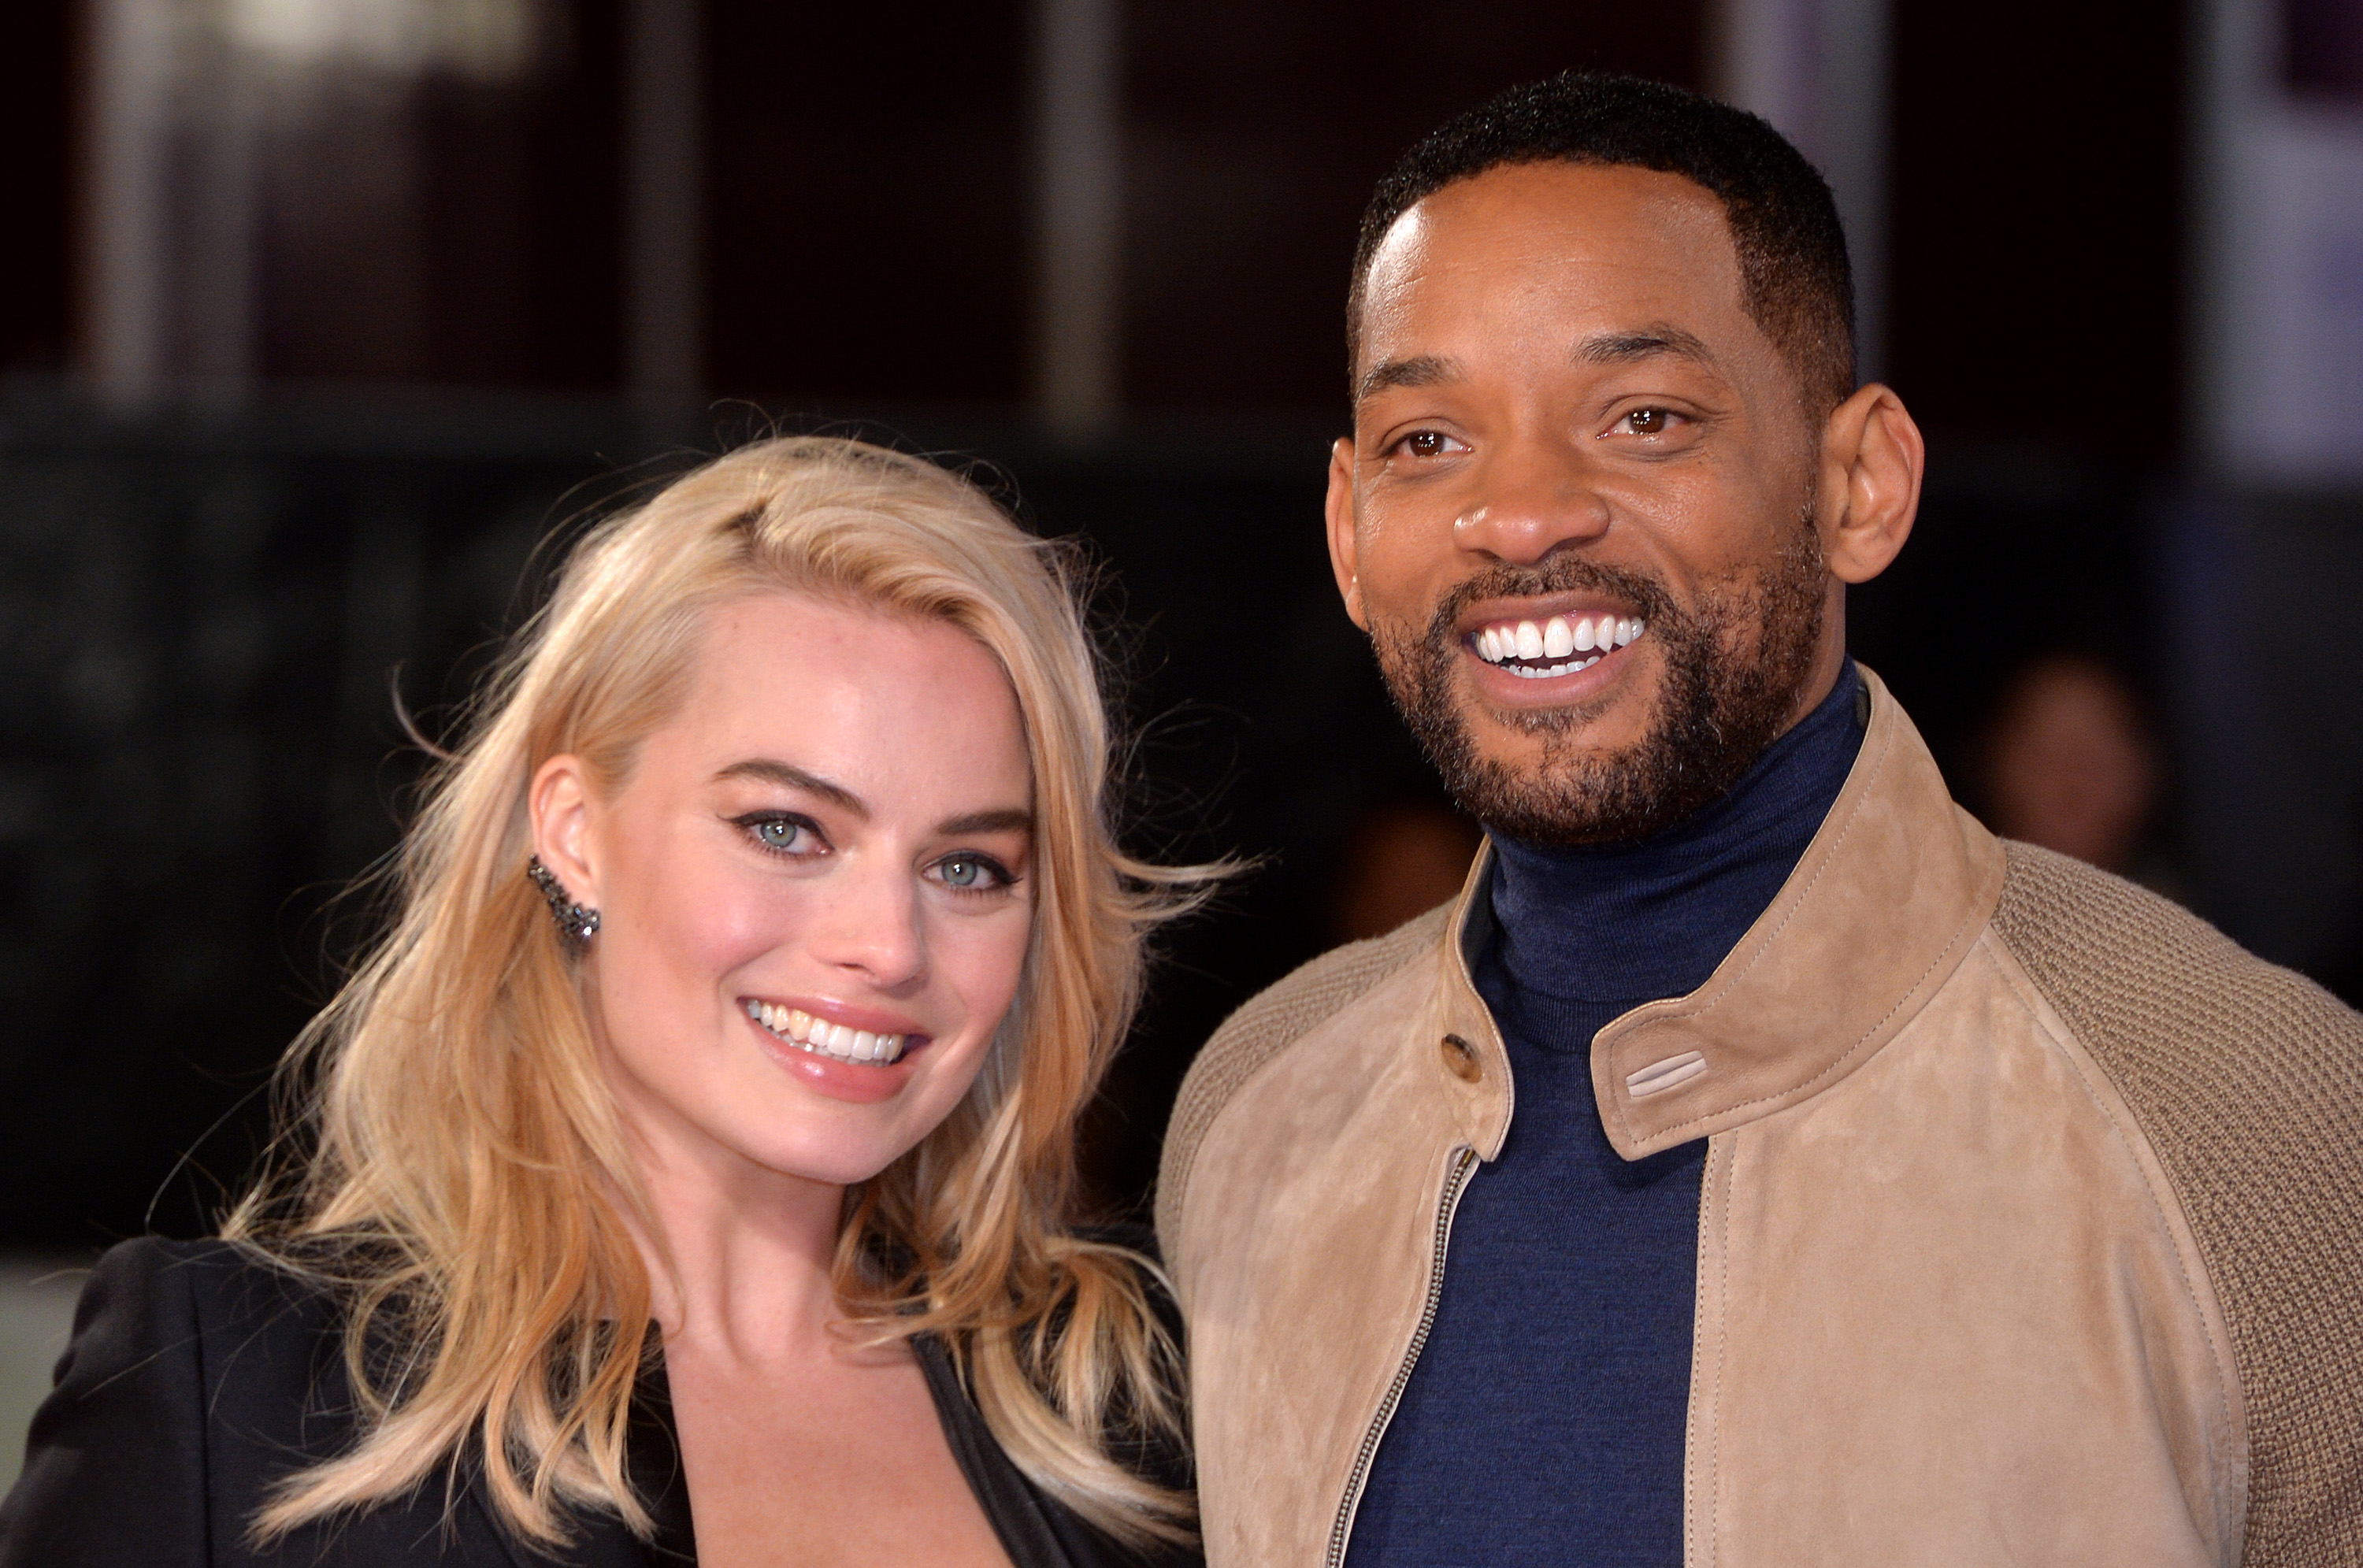 Is Focus Based On A True Story The Will Smith Margot Robbie Movie Has An Outlandish Plot